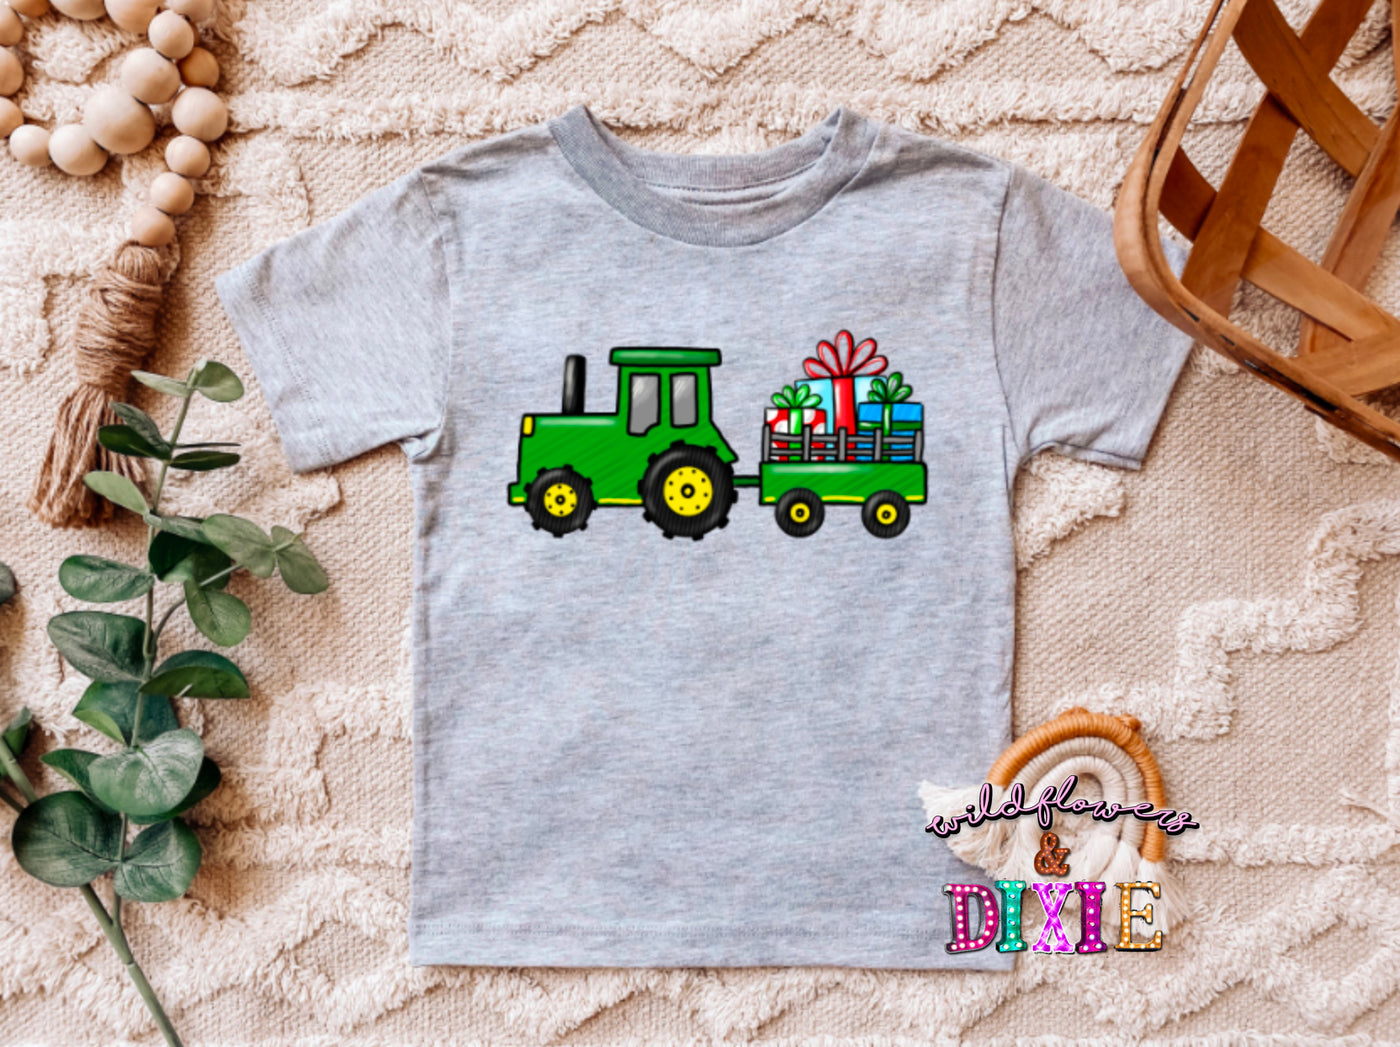 "Christmas Tractor" Infant/Toddler/Youth T-shirt (shown on "Hthr Athletic")